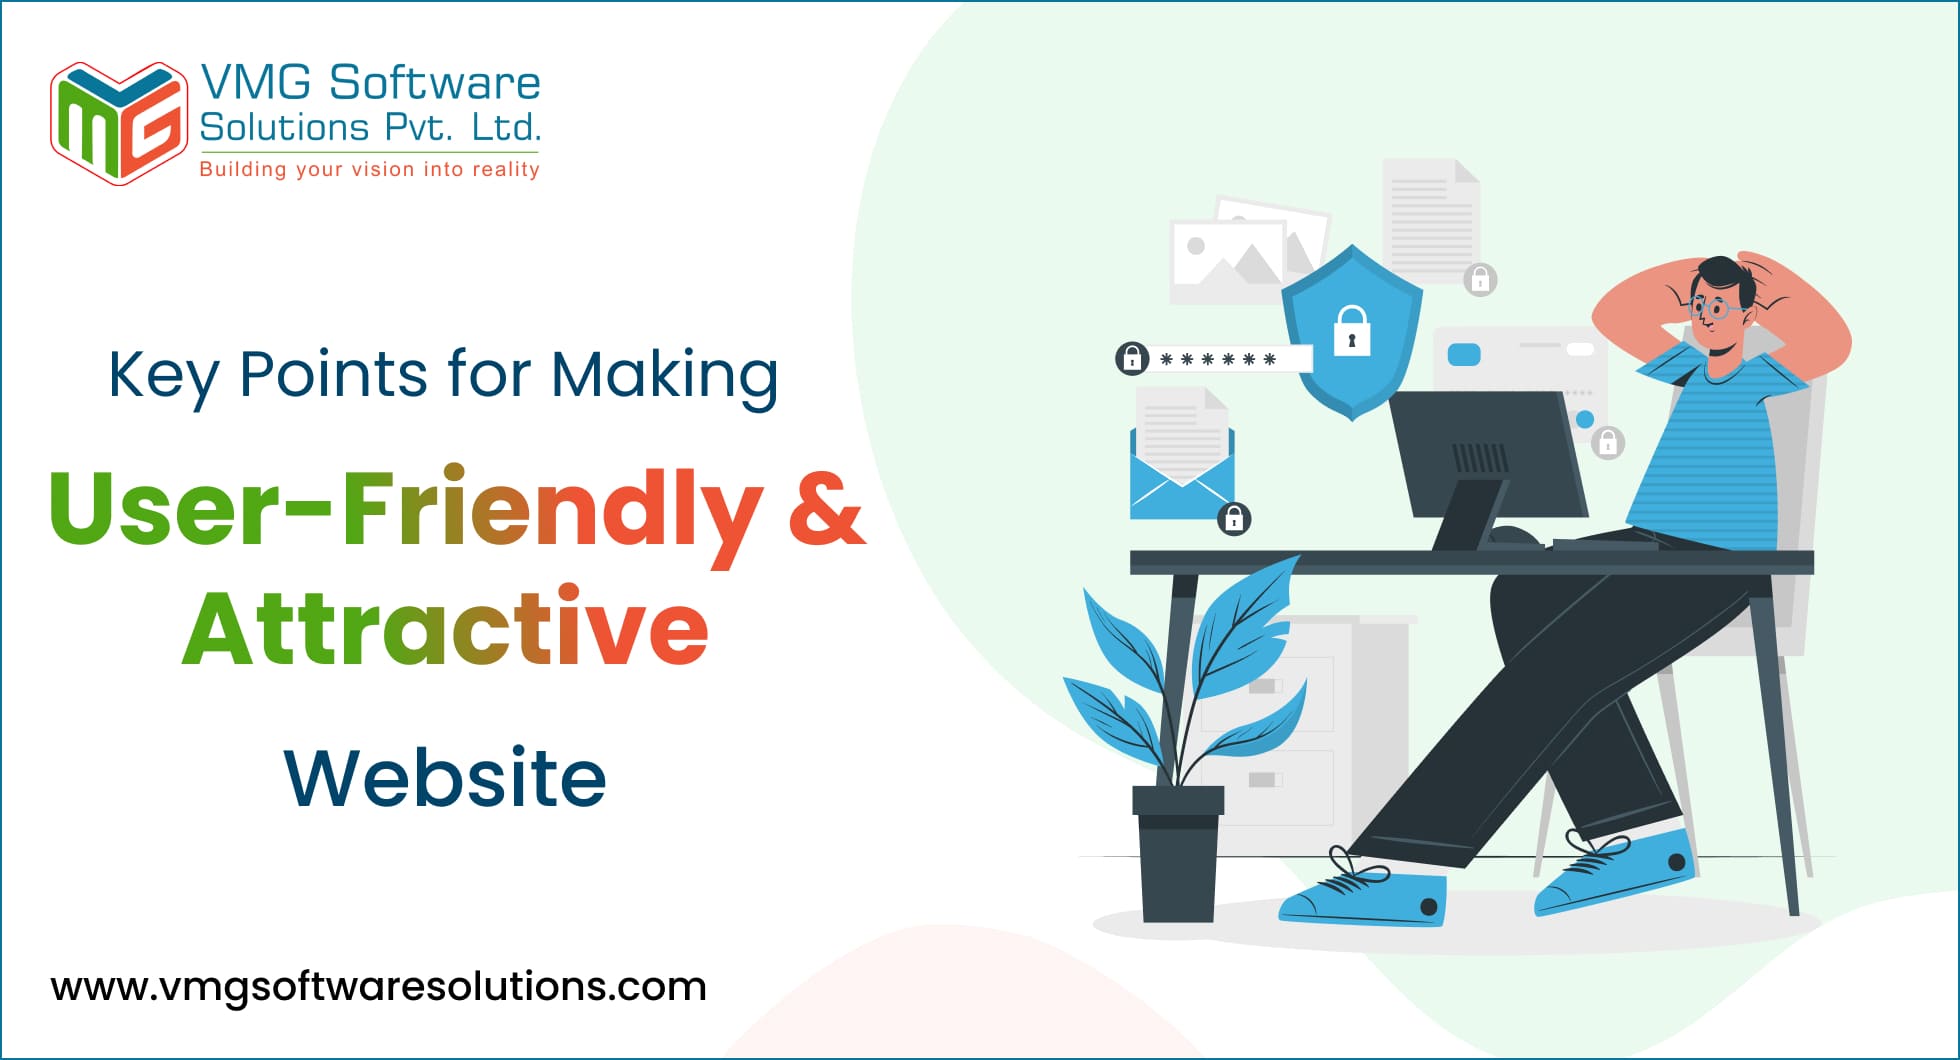 What is Key Points for Making Secure, User-friendly, attrective Website